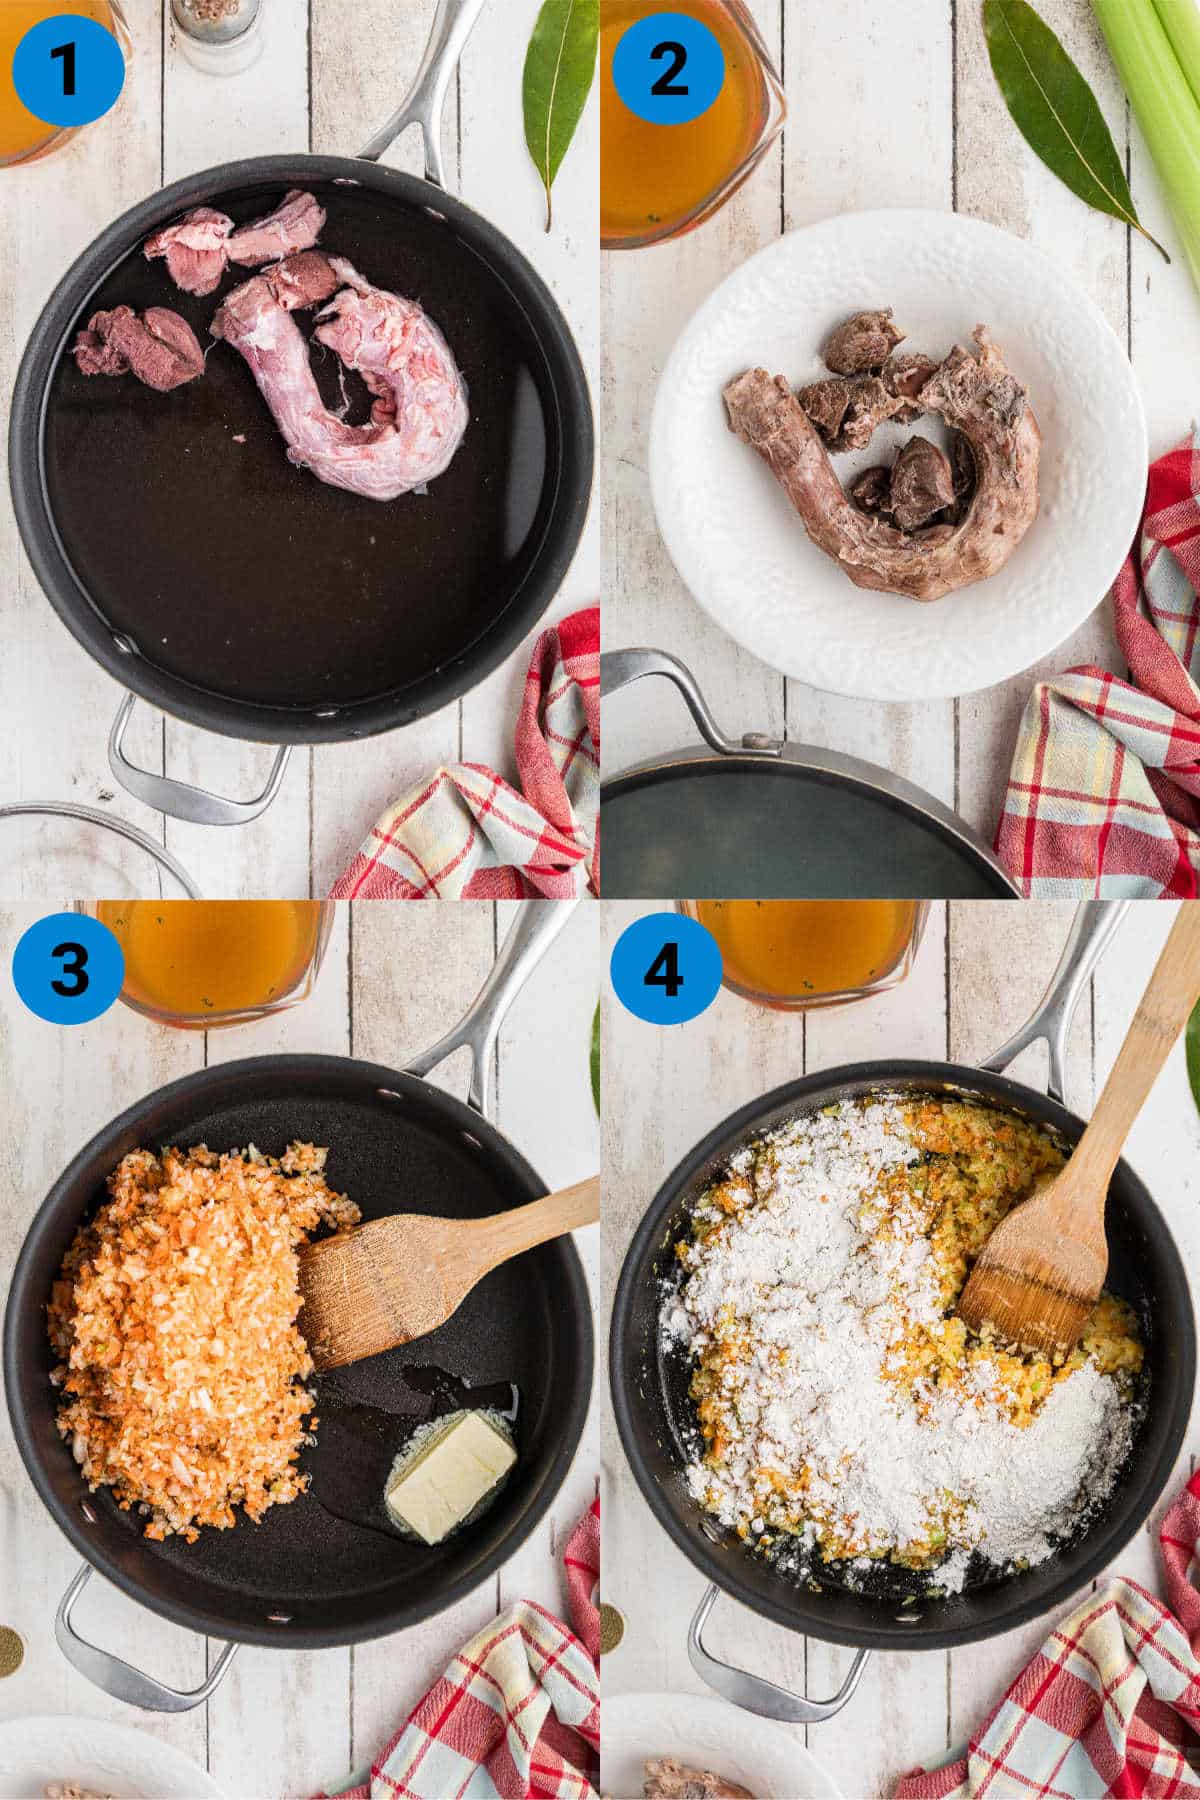 A collage of four images showing how to make a giblet gravy, recipe steps 1 through 4.